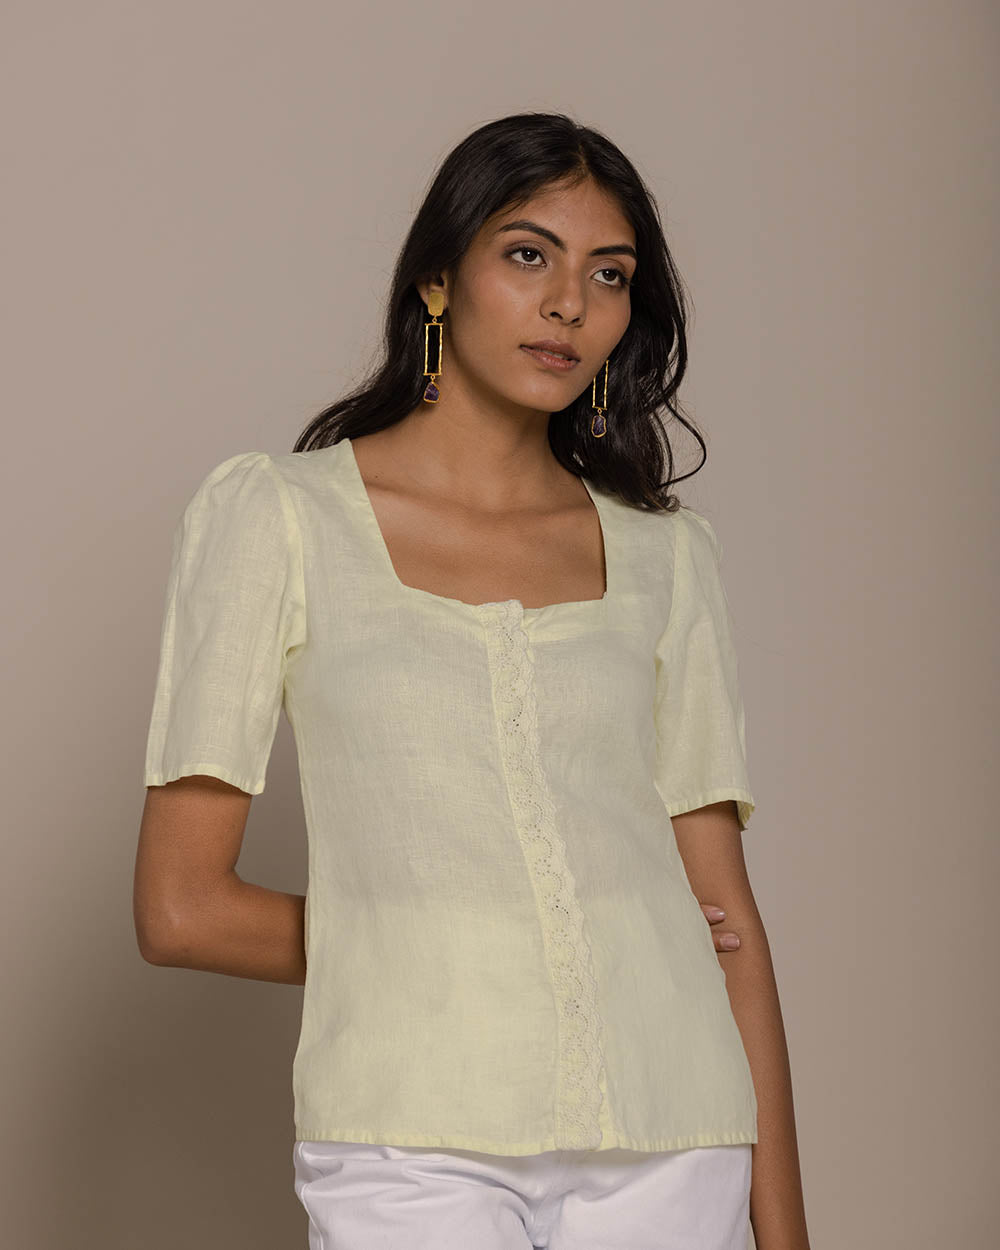 Cherry Chapstick Kisses Top - Butter Lemon at Kamakhyaa by Reistor. This item is Casual Wear, Hemp, Natural, Shirts, Solids, Tops, Womenswear, Yellow